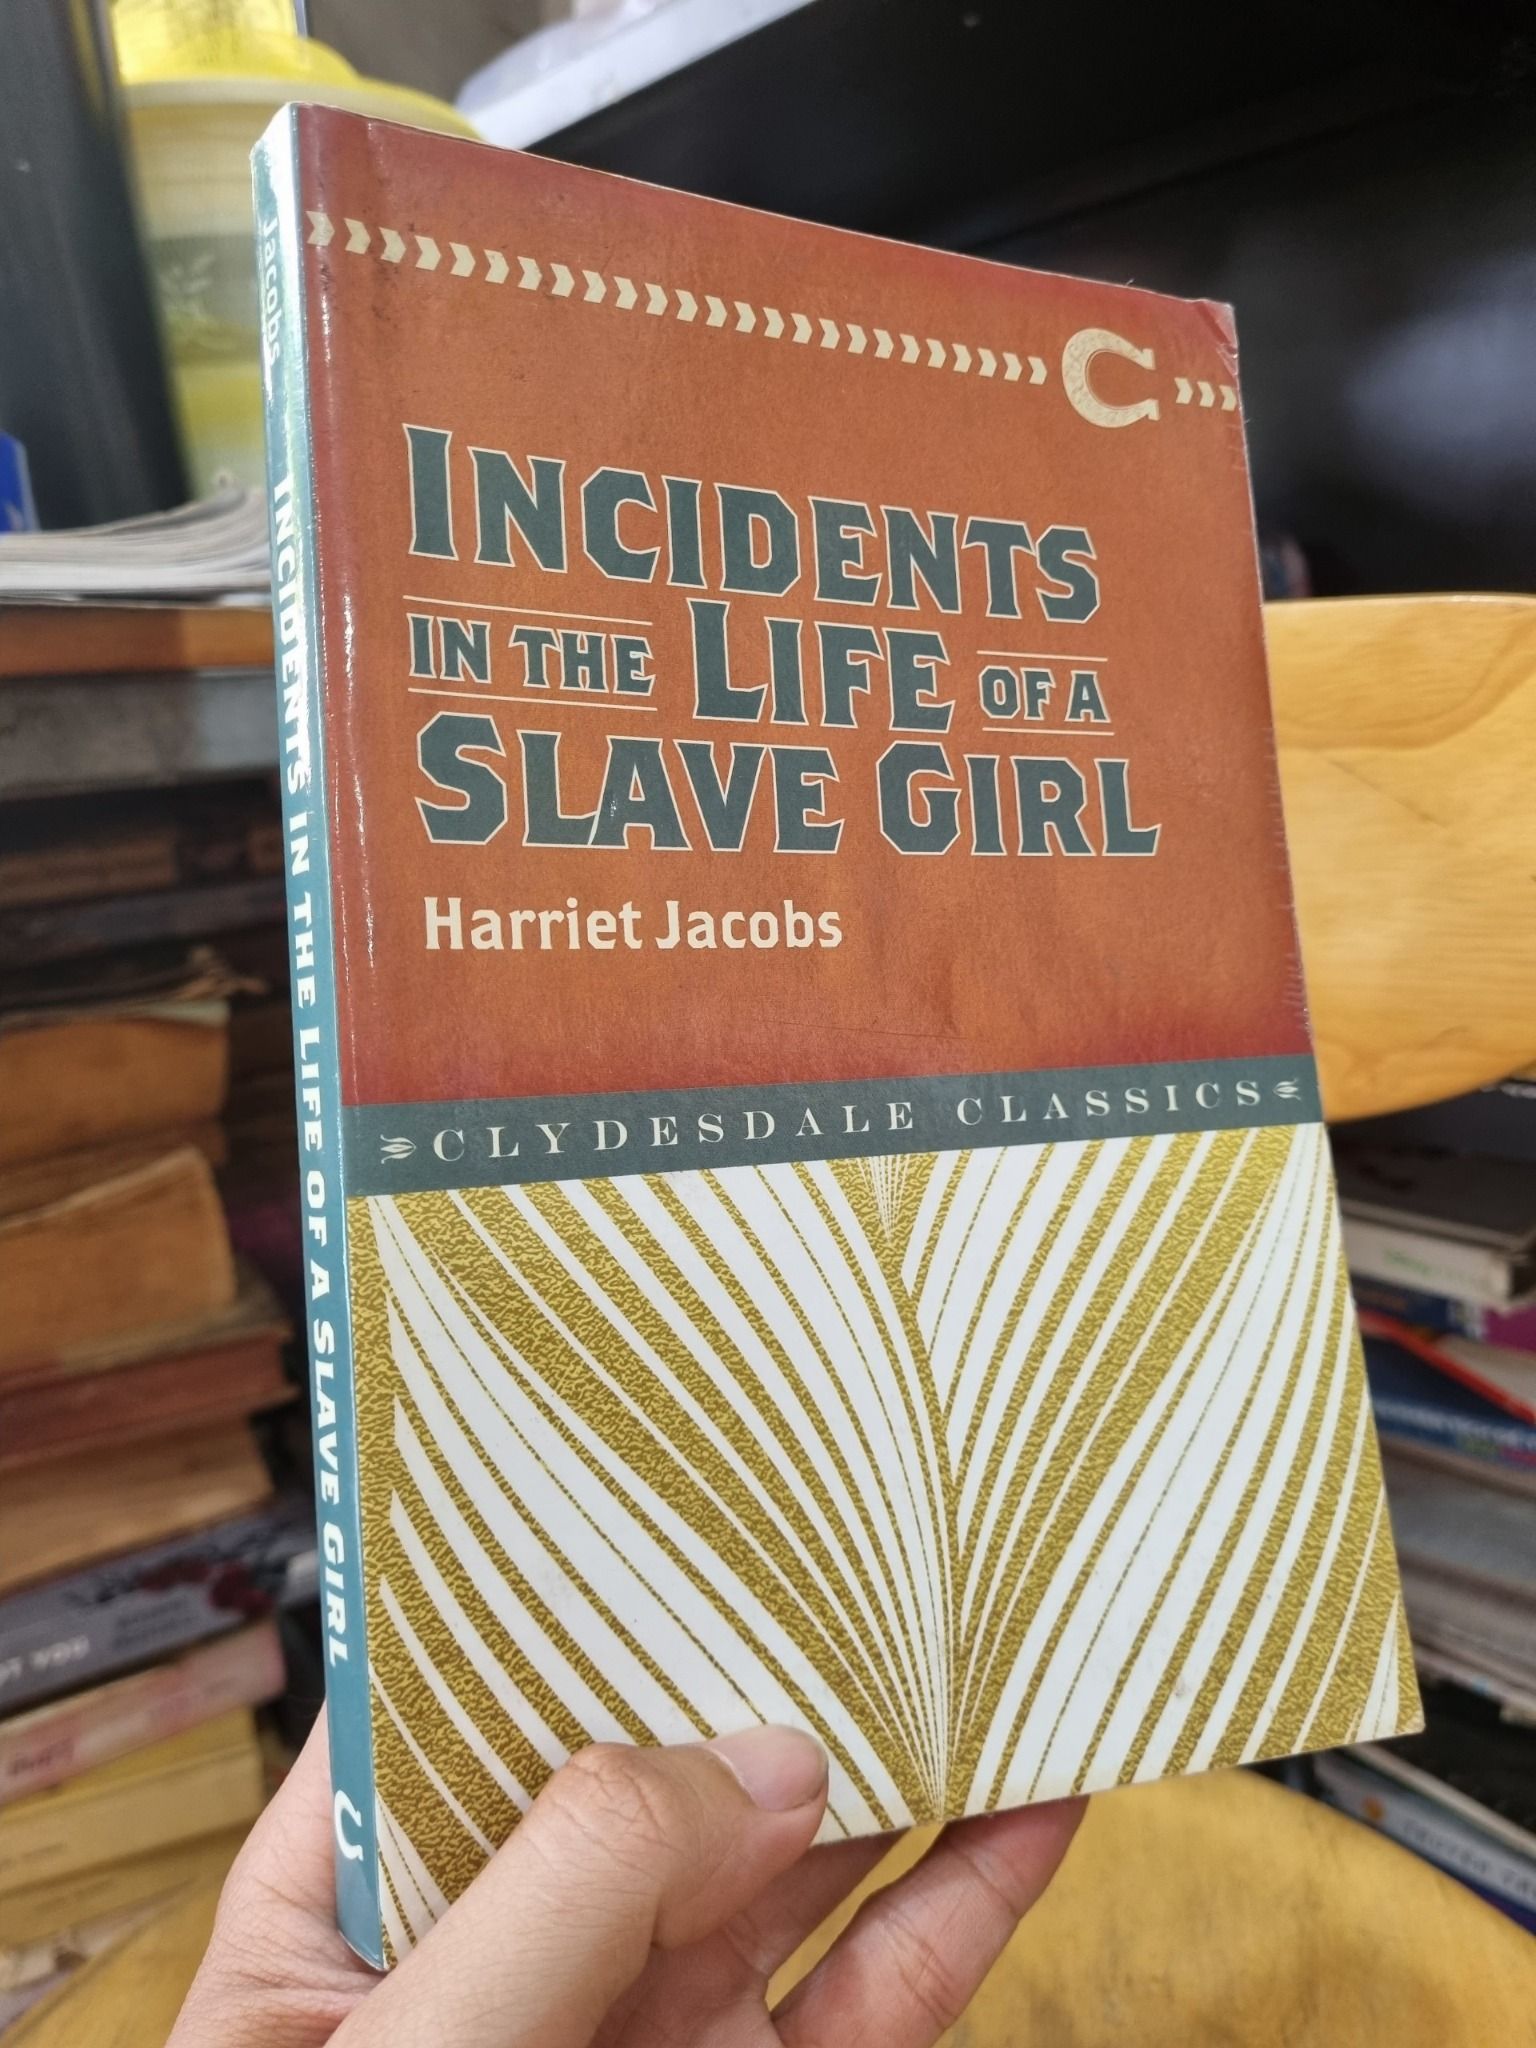  INCIDENTS IN THE LIFE OF A SLAVE GIRL - HARRIET JACOBS (CLYDESDALE CALSSICS) 